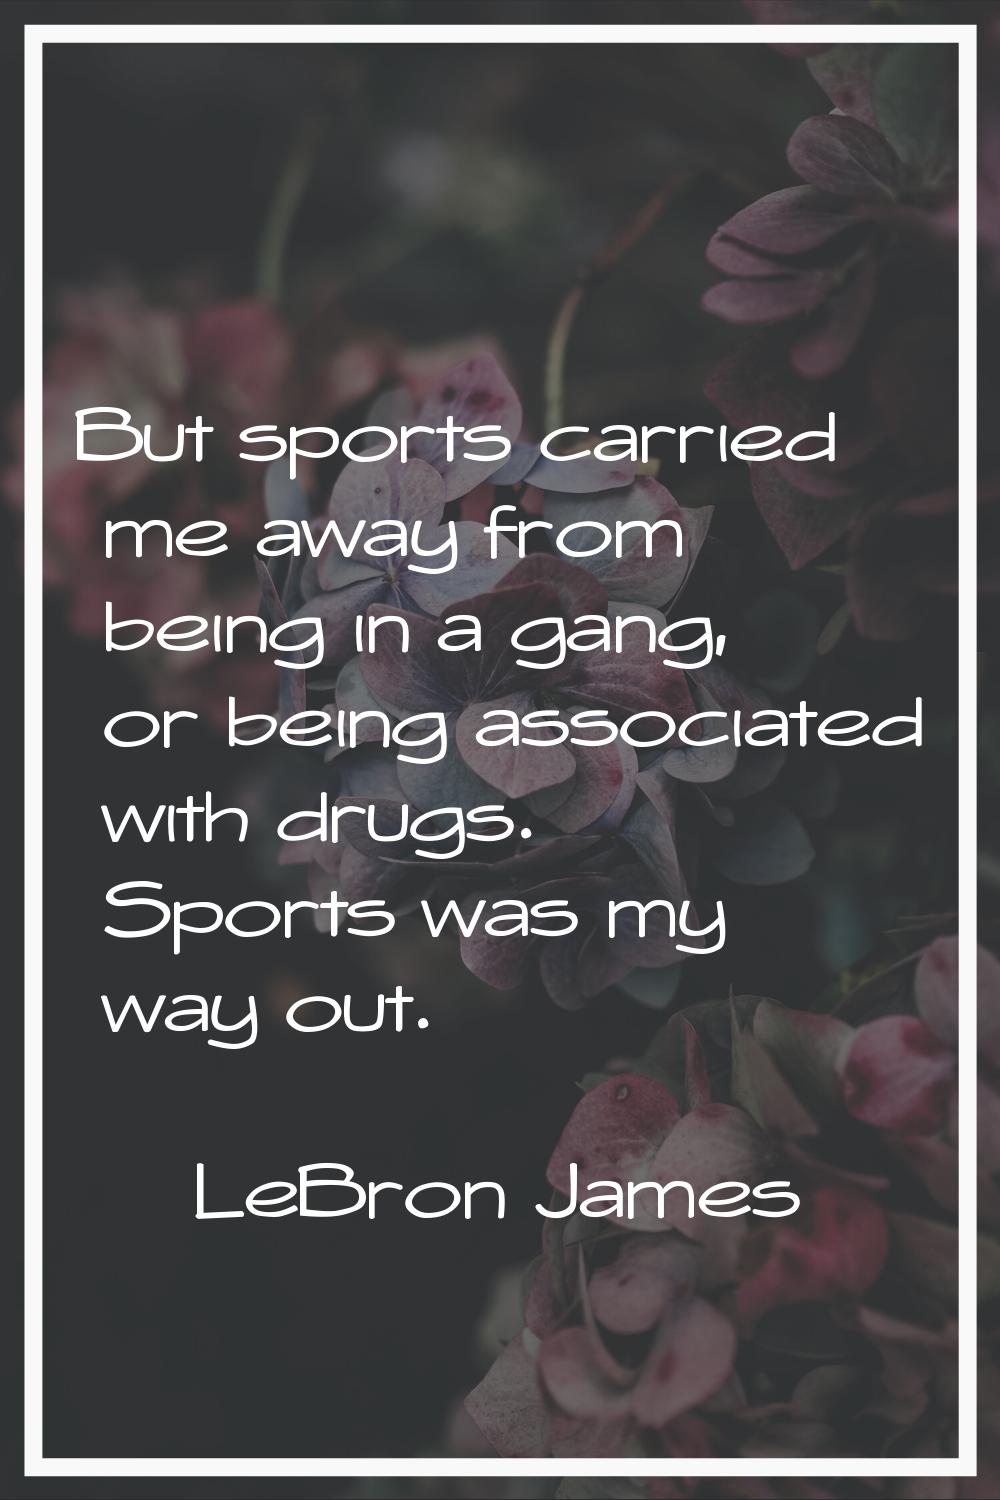 But sports carried me away from being in a gang, or being associated with drugs. Sports was my way 